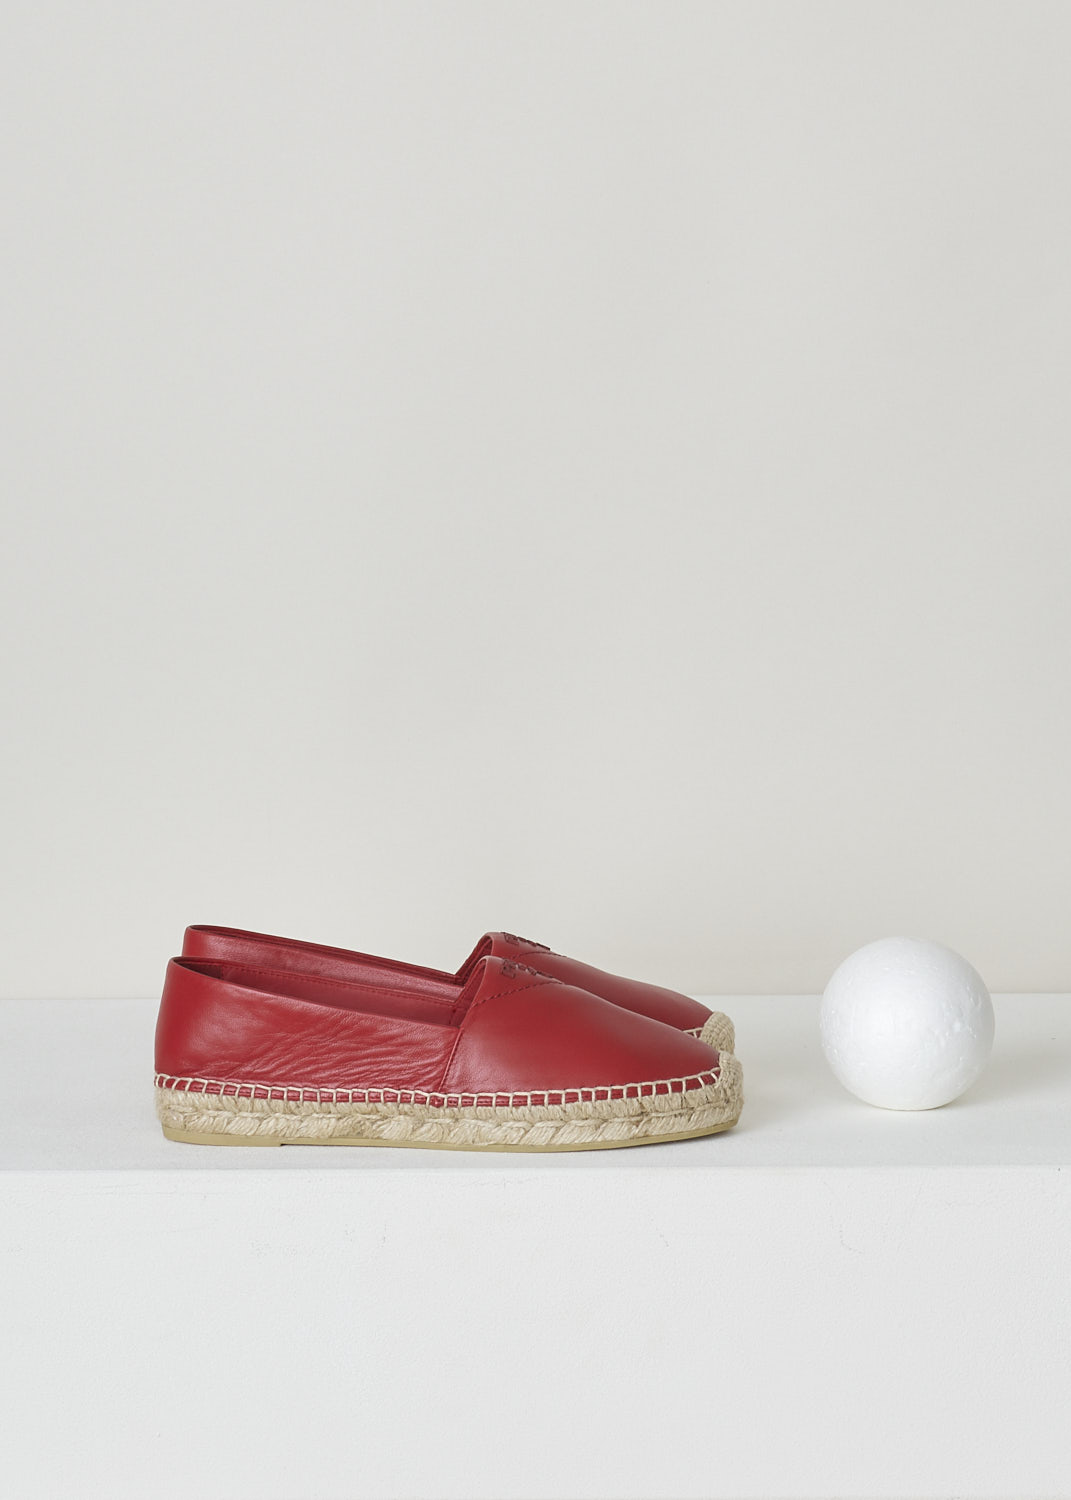 PRADA, RED LEATHER ESPADRILLES, NAPPA_1_1S871M_79N_F0011_ROSSO, Red, Side, These red, soft leather Espadrilles have a round toe that goes over into the braided jute soles. The brand's triangle logo can be found on the vamp in black.  
